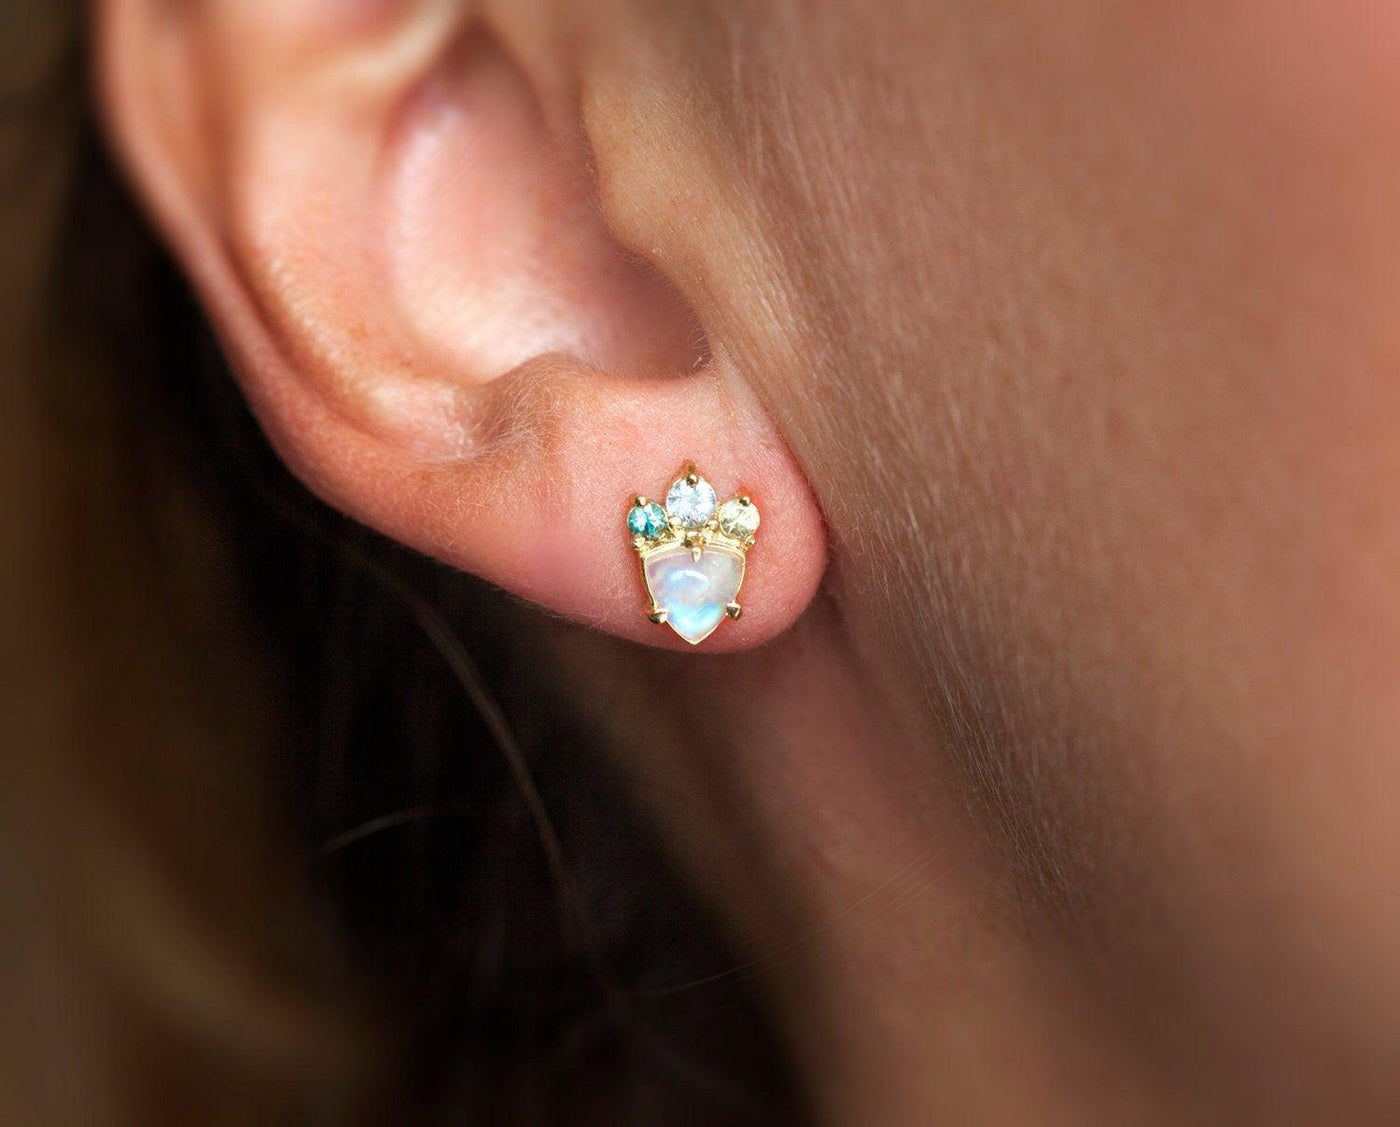 White trillion-shaped moonstone earrings with sapphire studs